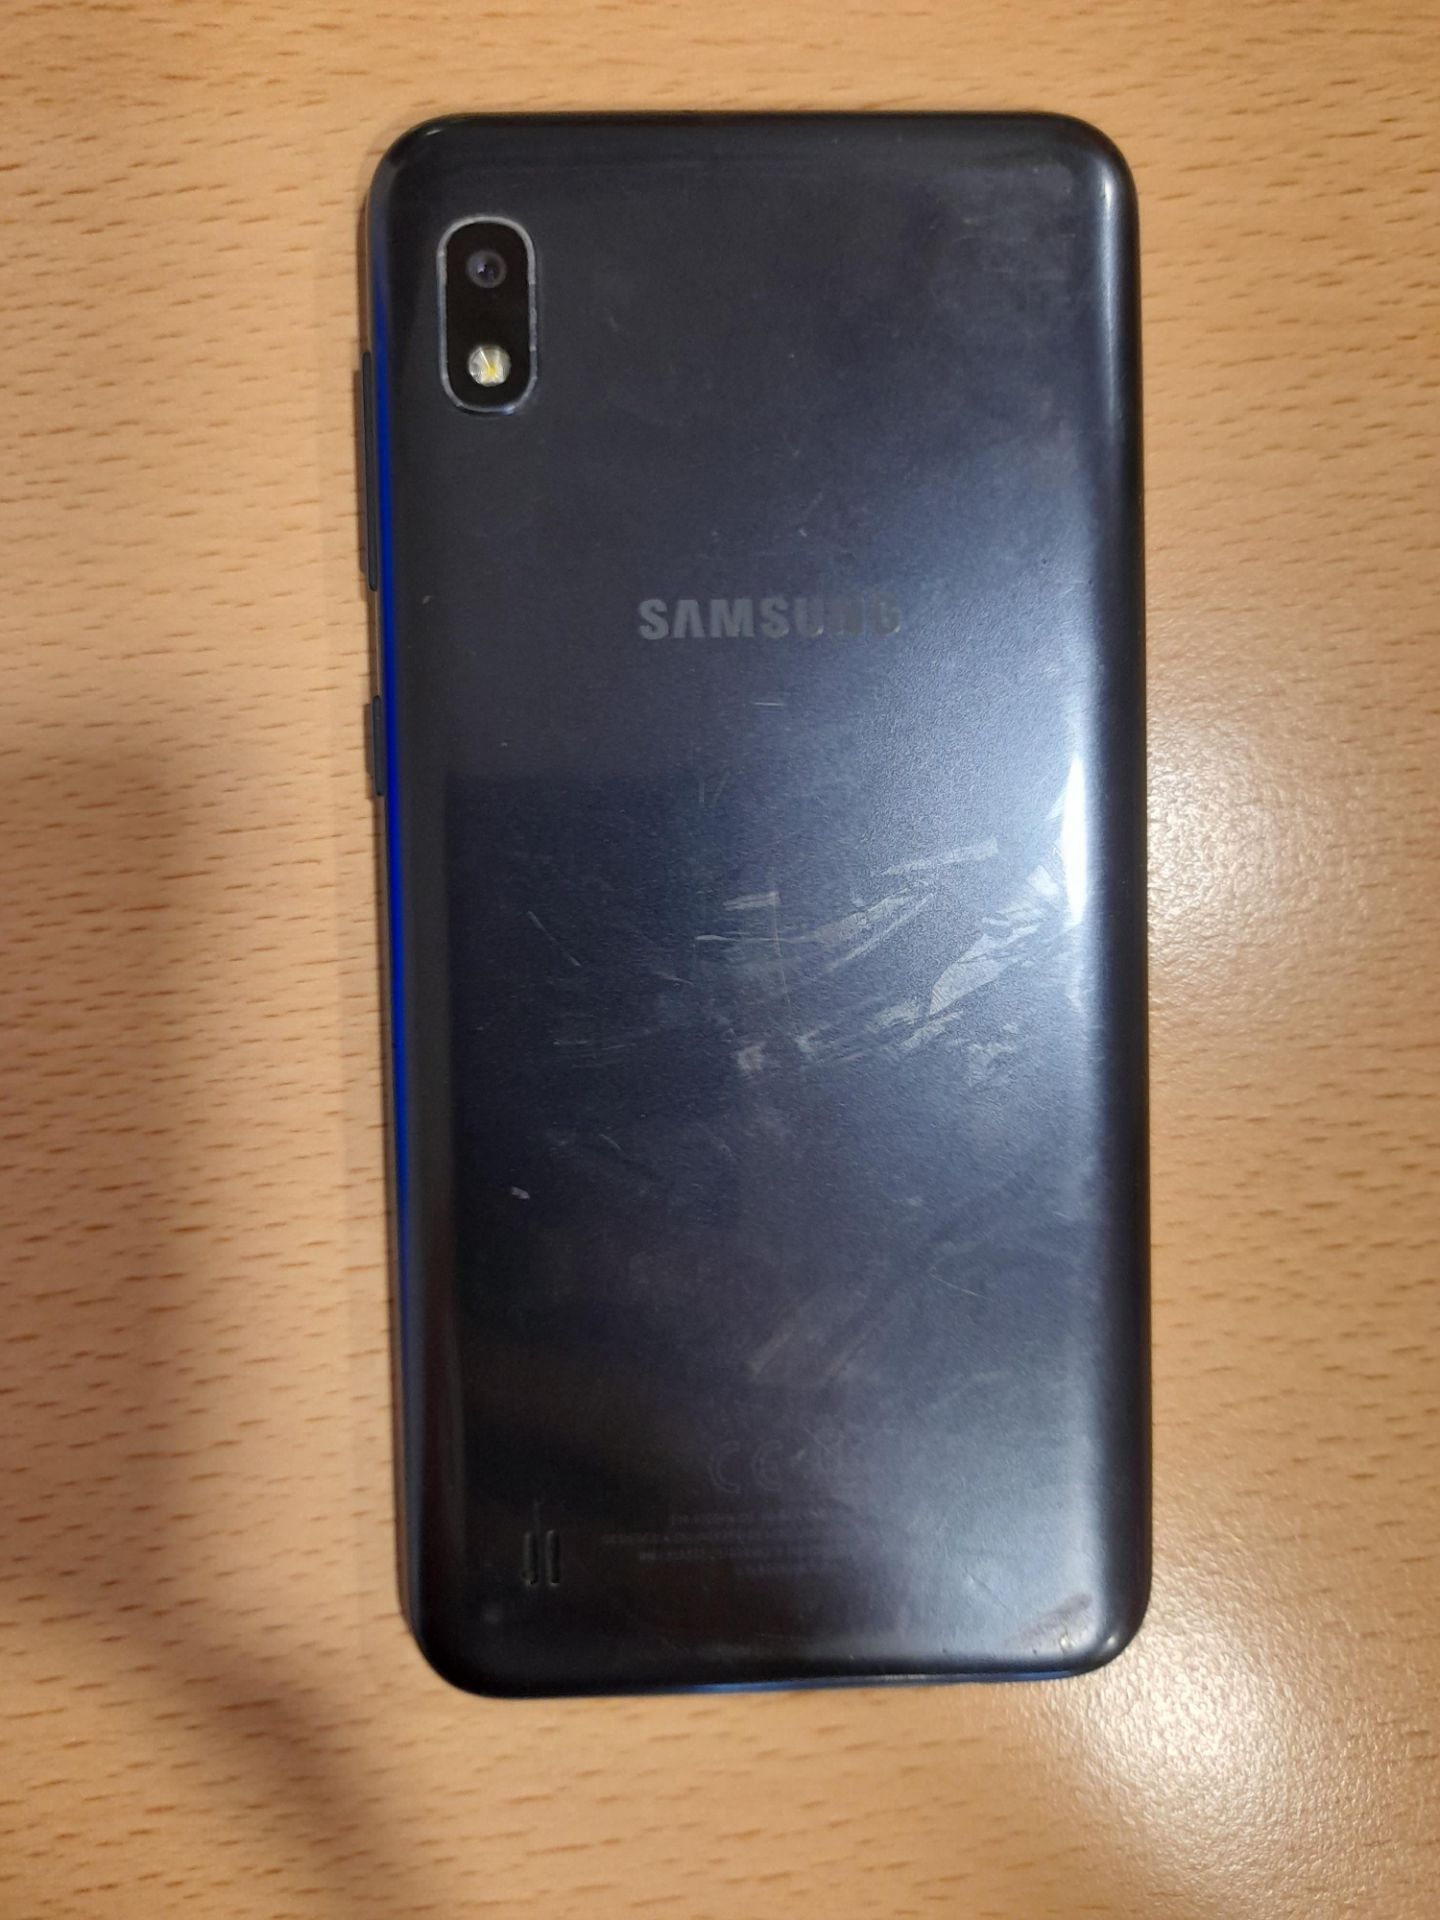 Samsung Galaxy A10 mobile phone, Model SM-A105FN, - Image 3 of 5